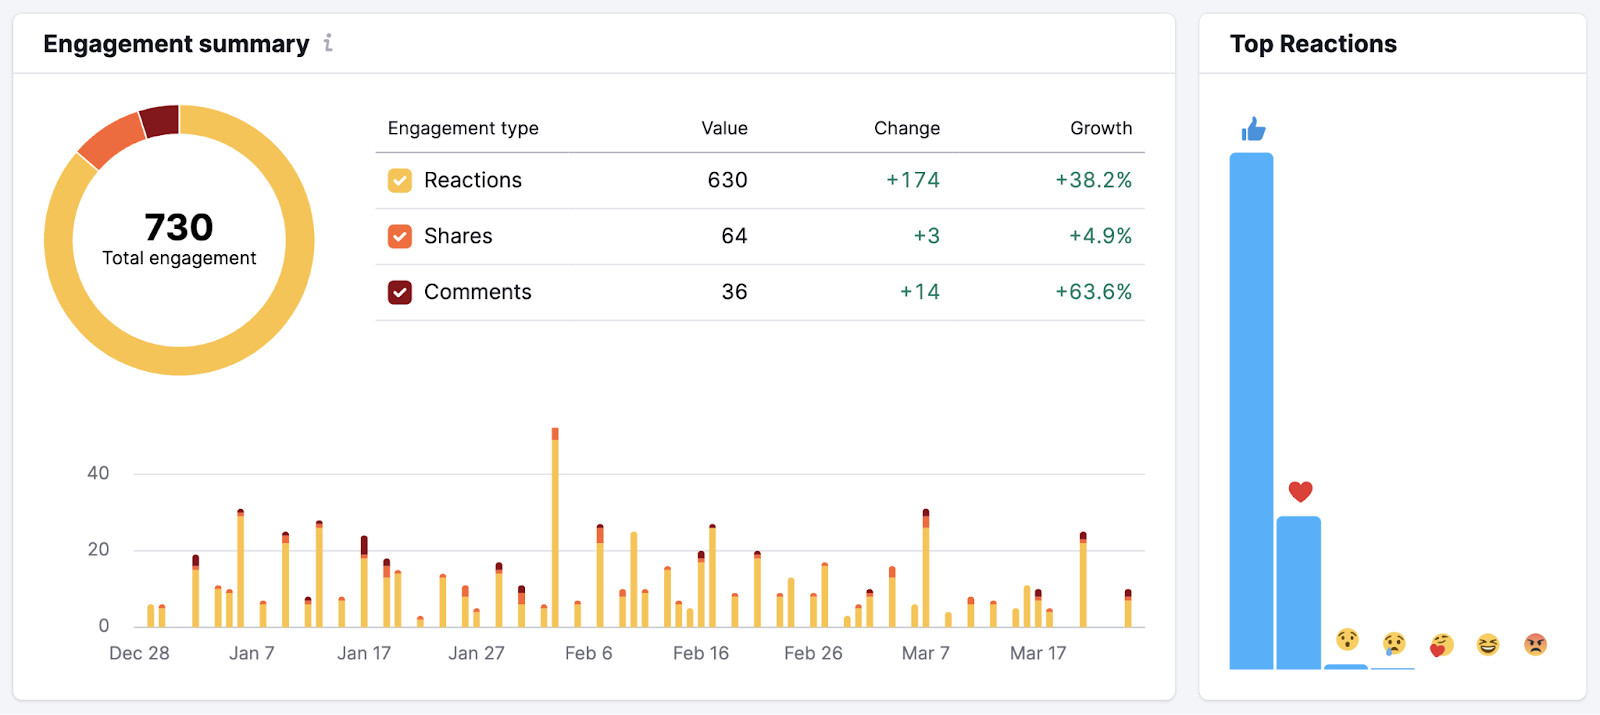 Engagement summary data, showing reactions, shares, and comments